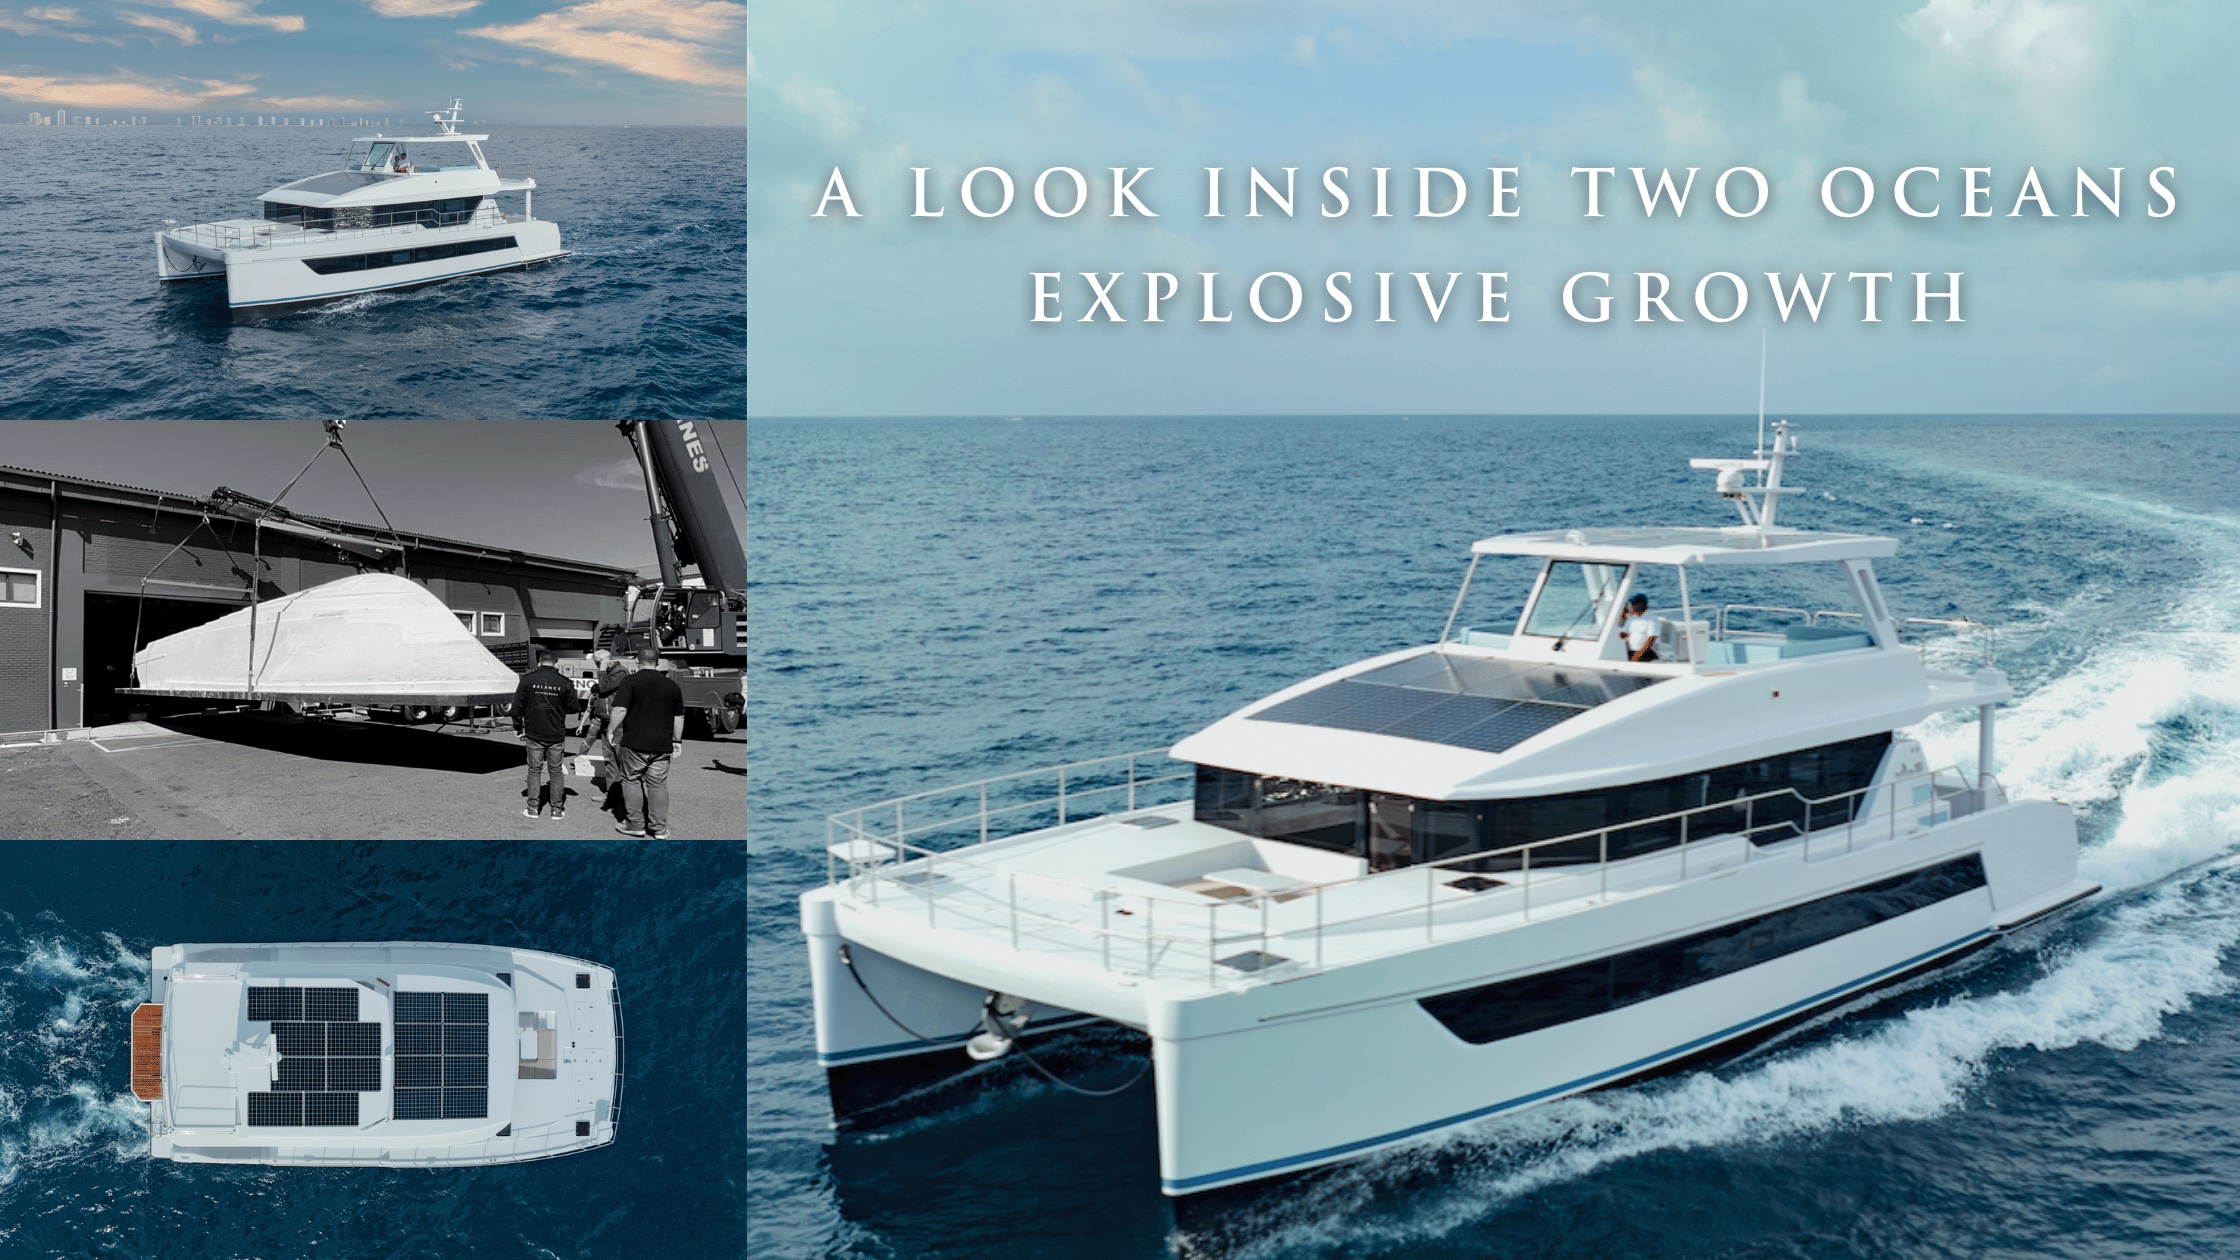 Two Oceans Scales Operations & Readies the ECLIPSE Express Cruiser Line: A Look Inside the Brand’s Explosive Growth